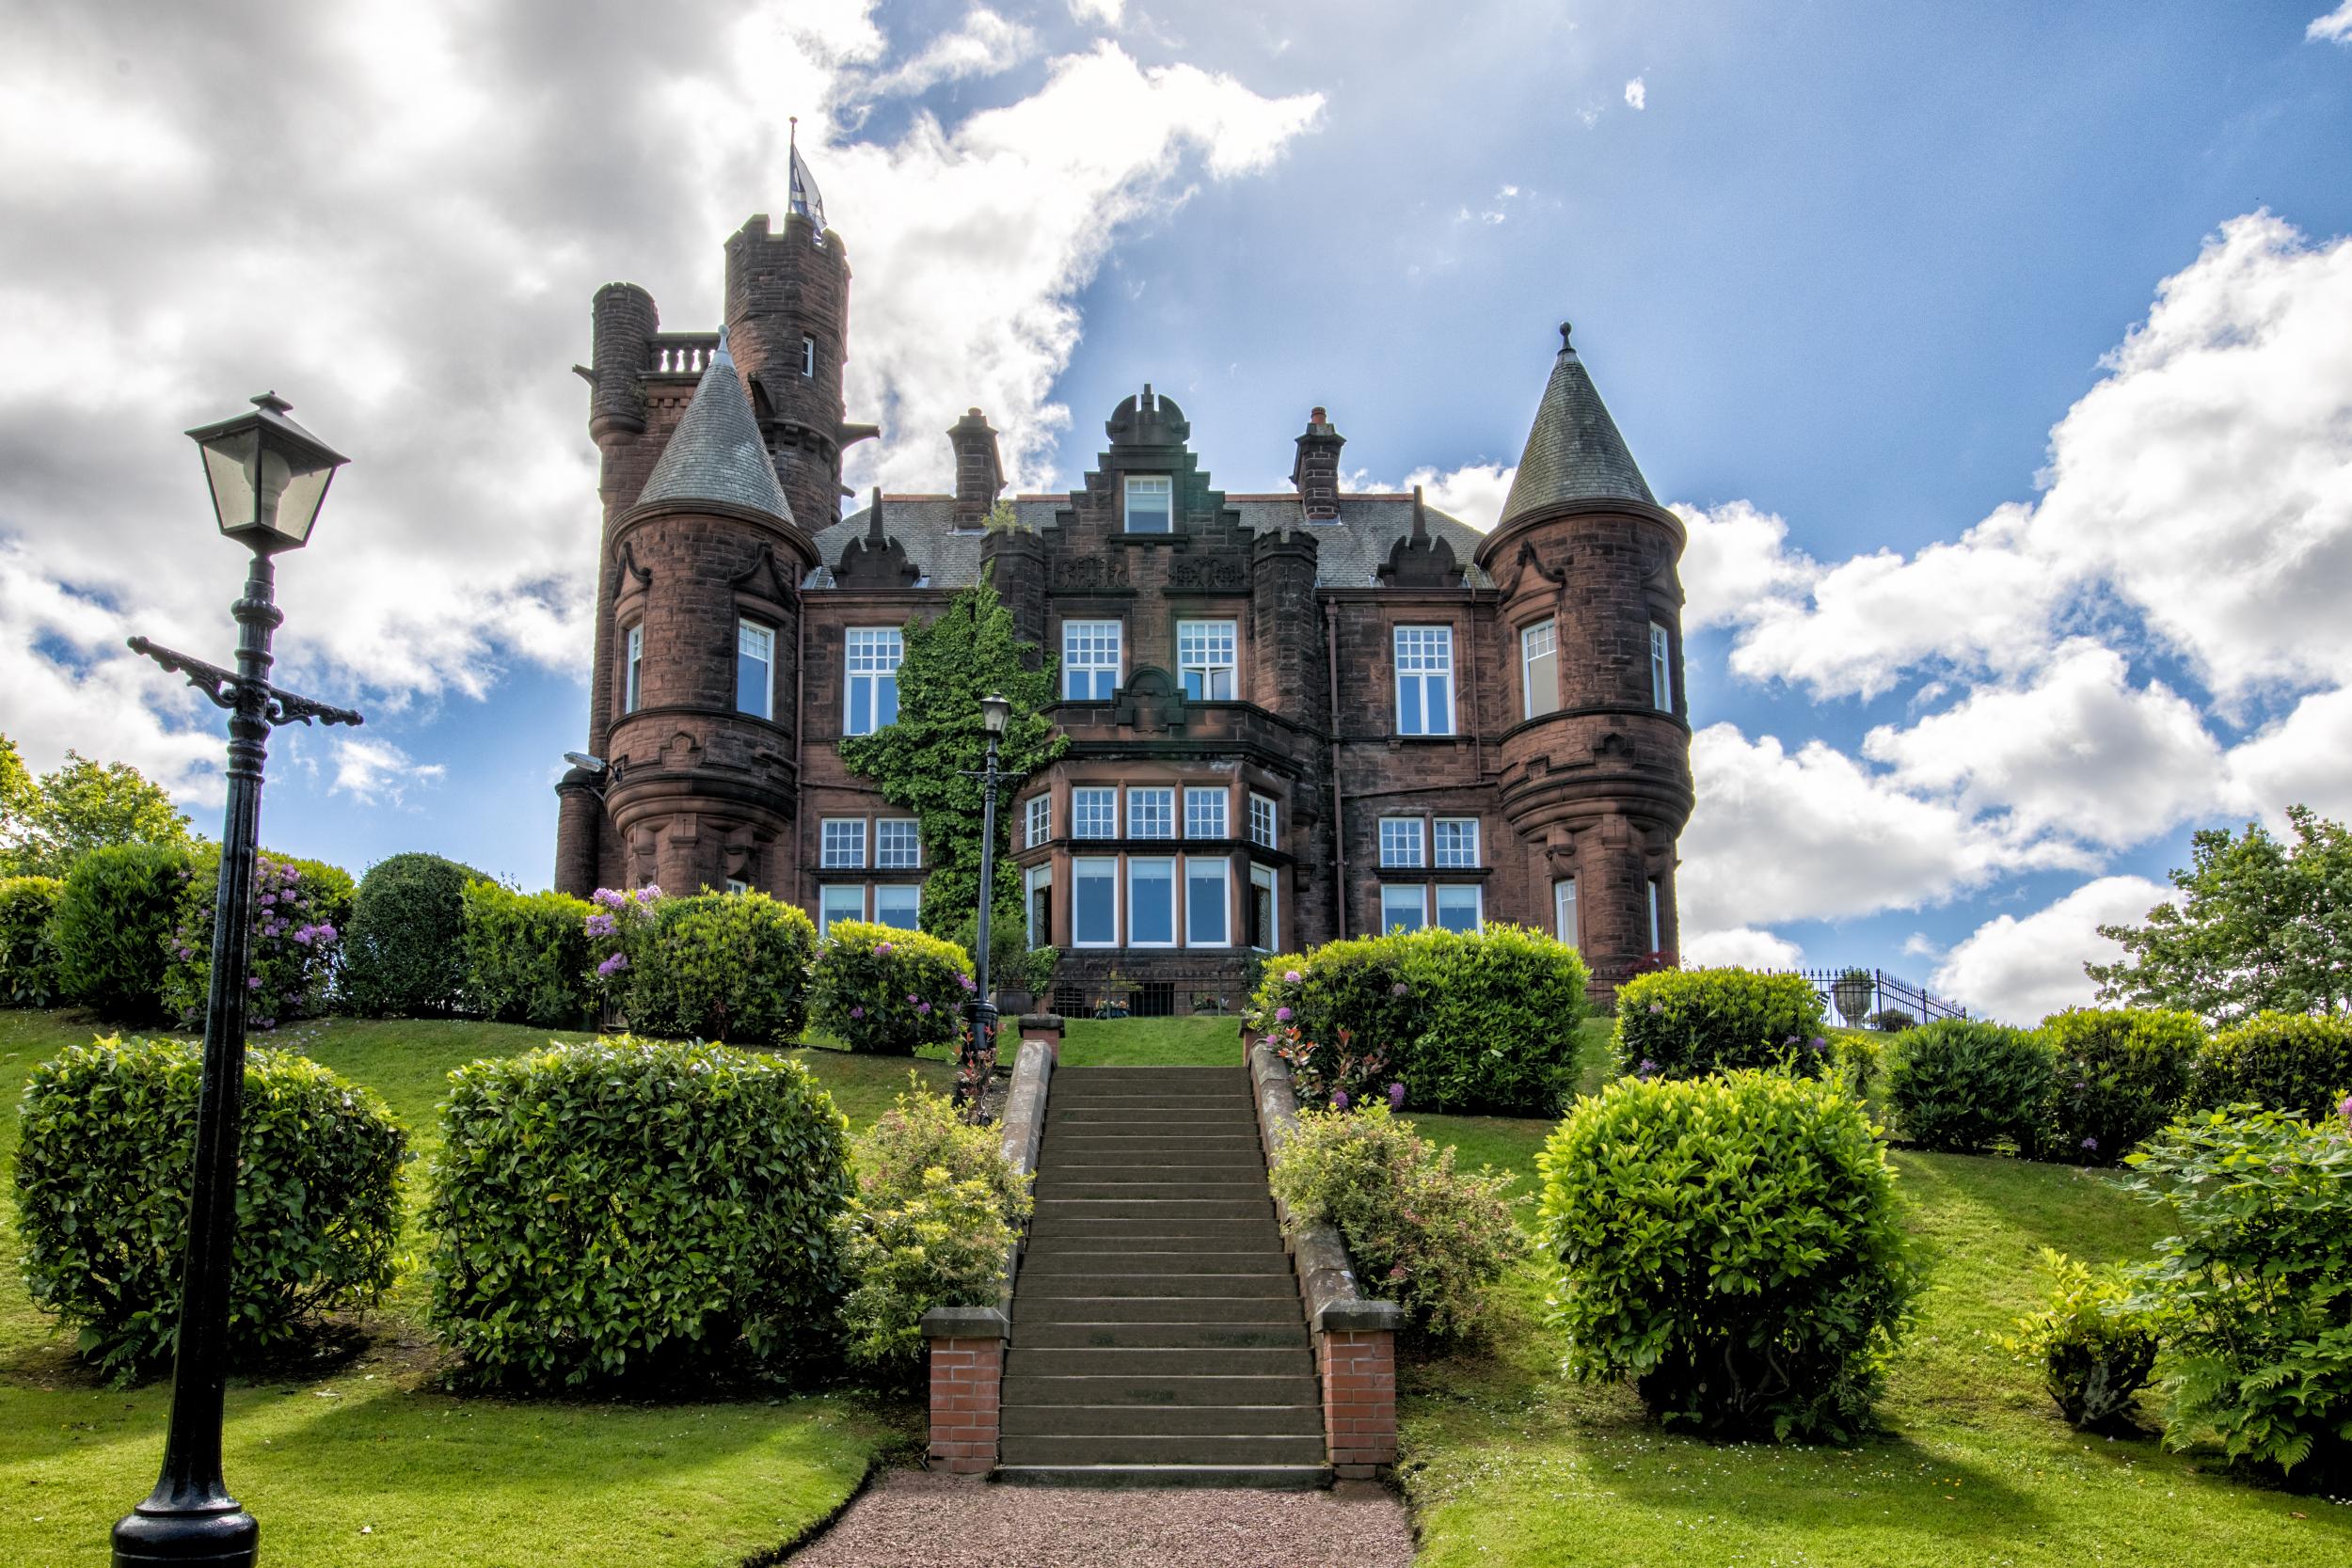 The Sherbrooke Castle Hotel holds the title for Glasgow’s only castle hotel